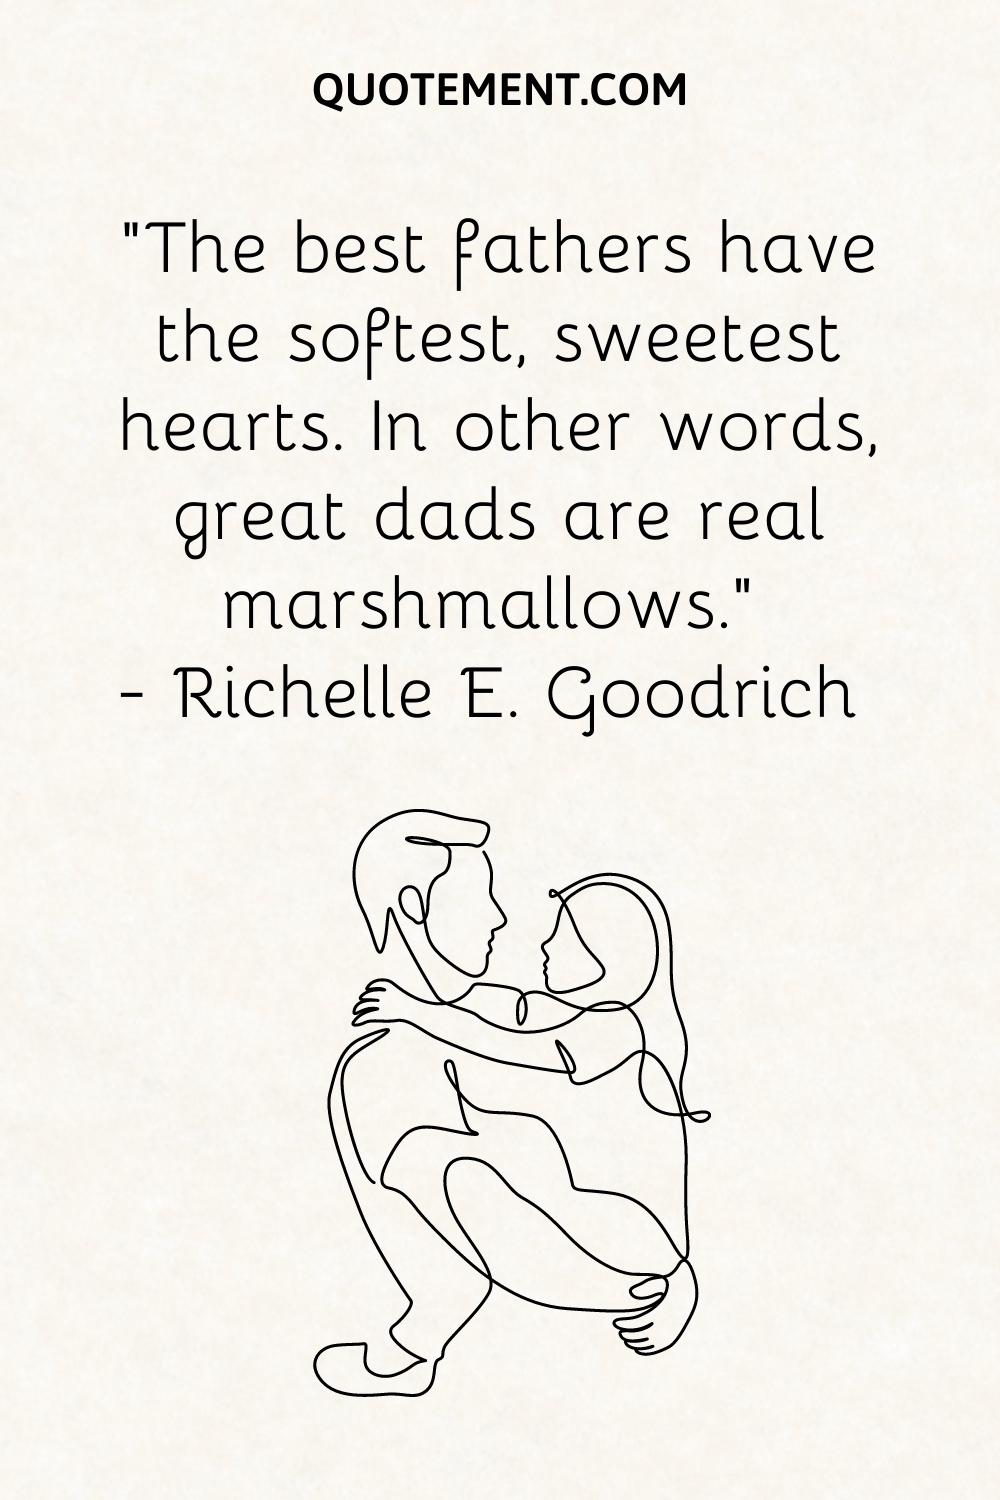 “The best fathers have the softest, sweetest hearts. In other words, great dads are real marshmallows.” — Richelle E. Goodrich